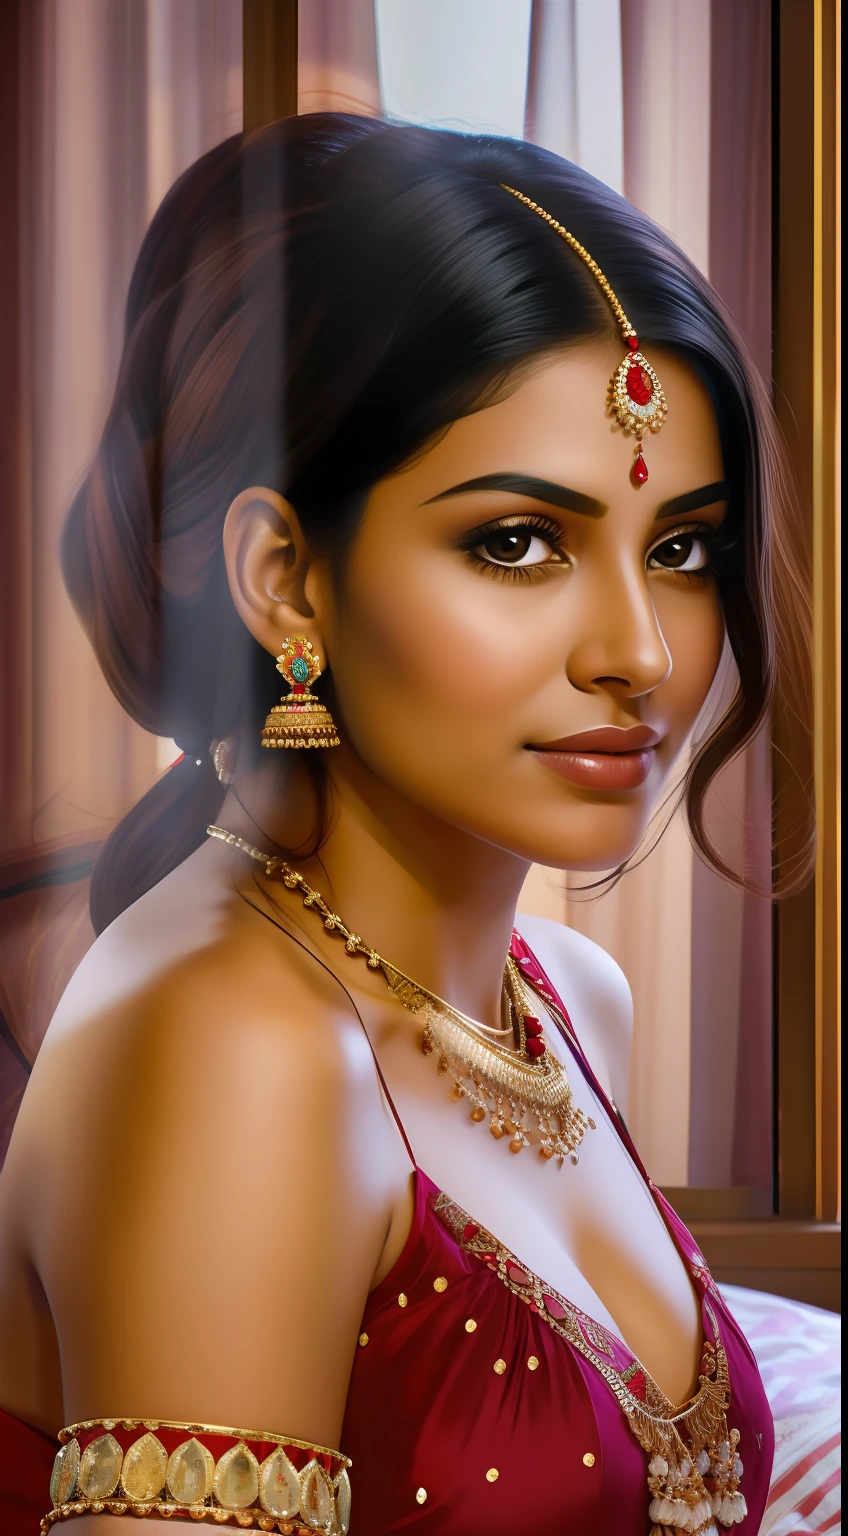 "Portrait of   actress Indian princess in a cozy and intimate bedroom setting."